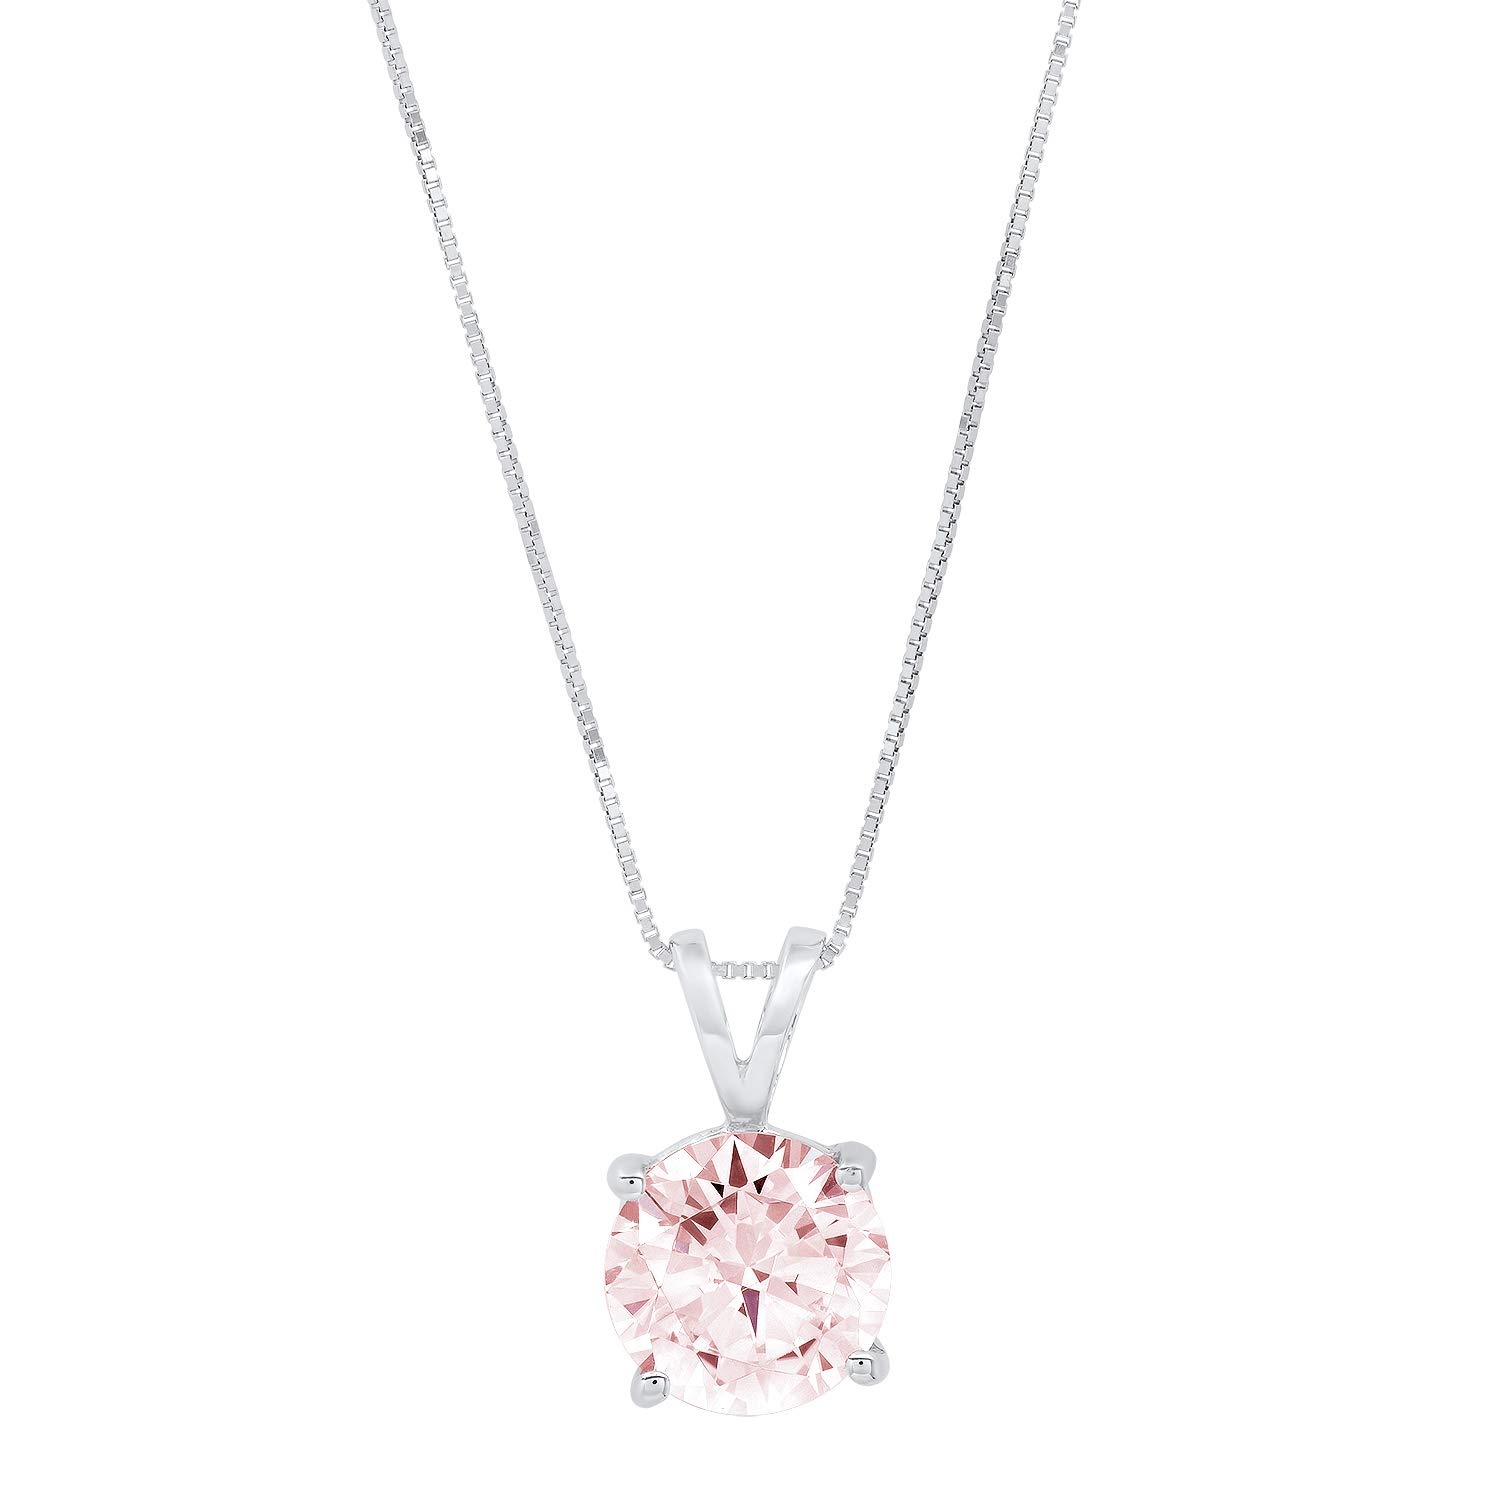 3.0 ct Brilliant Round Cut Stunning Genuine Pink Simulated Diamond CZ Ideal VVS1 D Solitaire Pendant Necklace With 18